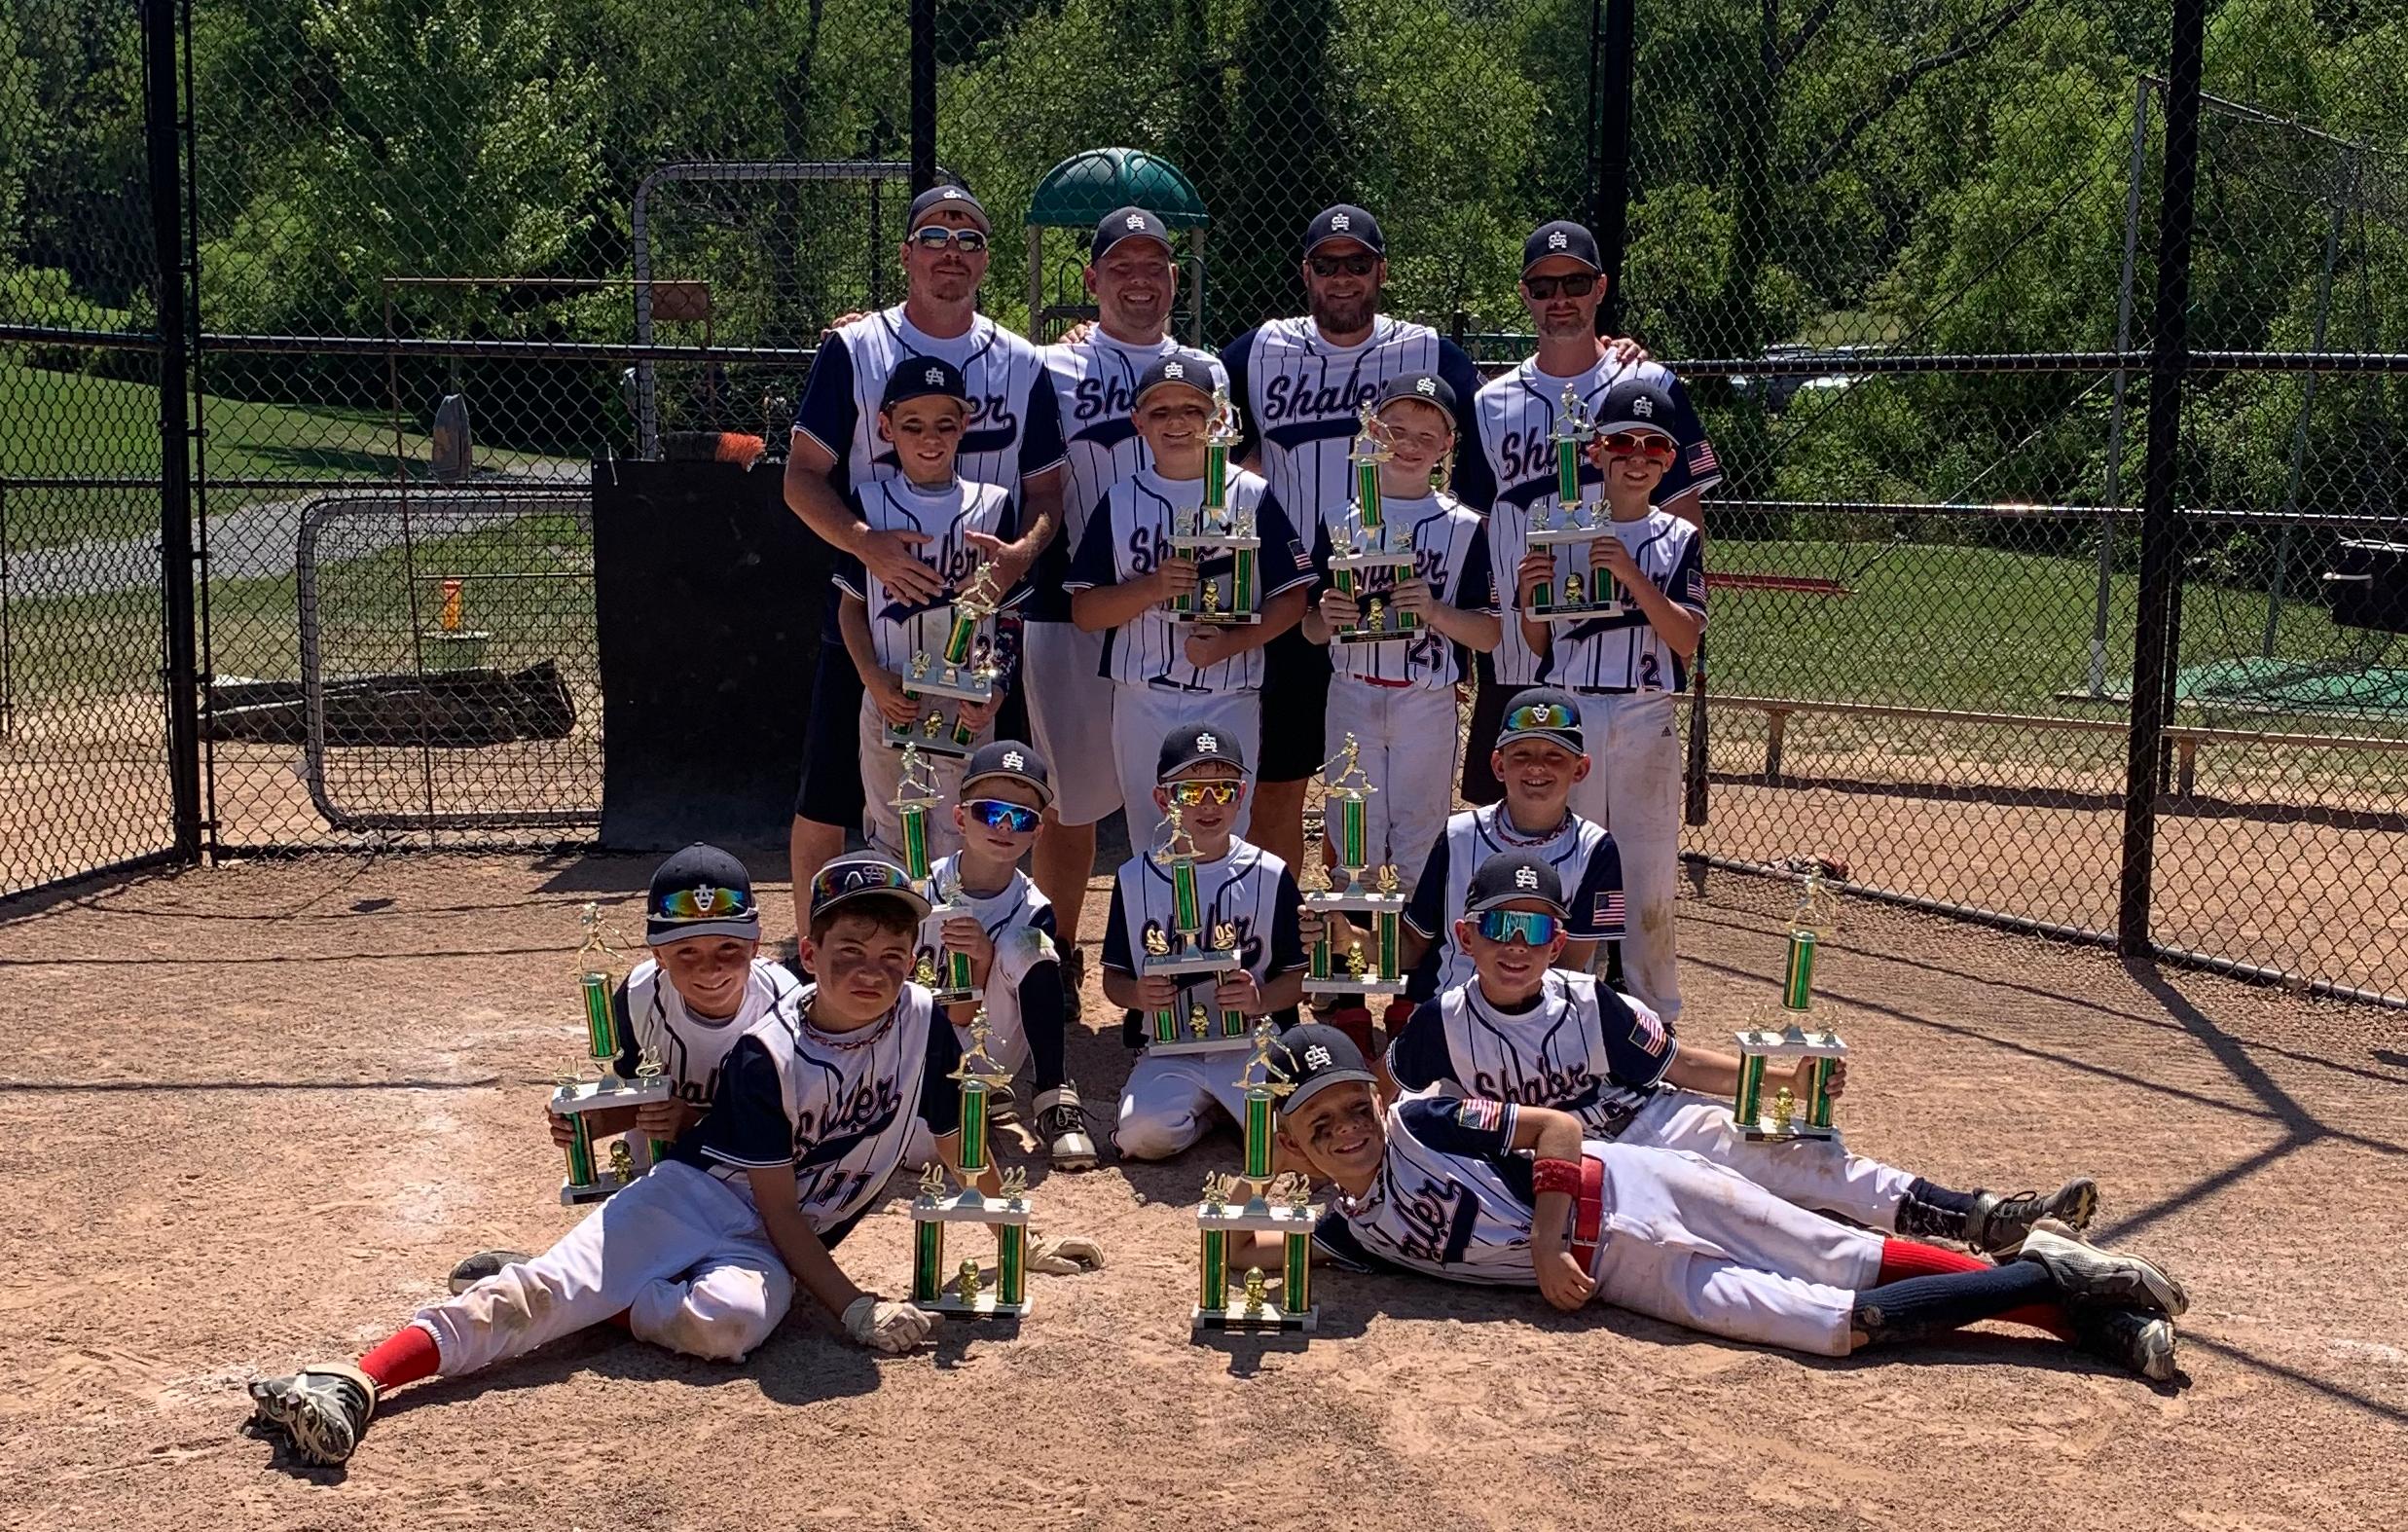 10U Team takes 2nd place at BMP tournament